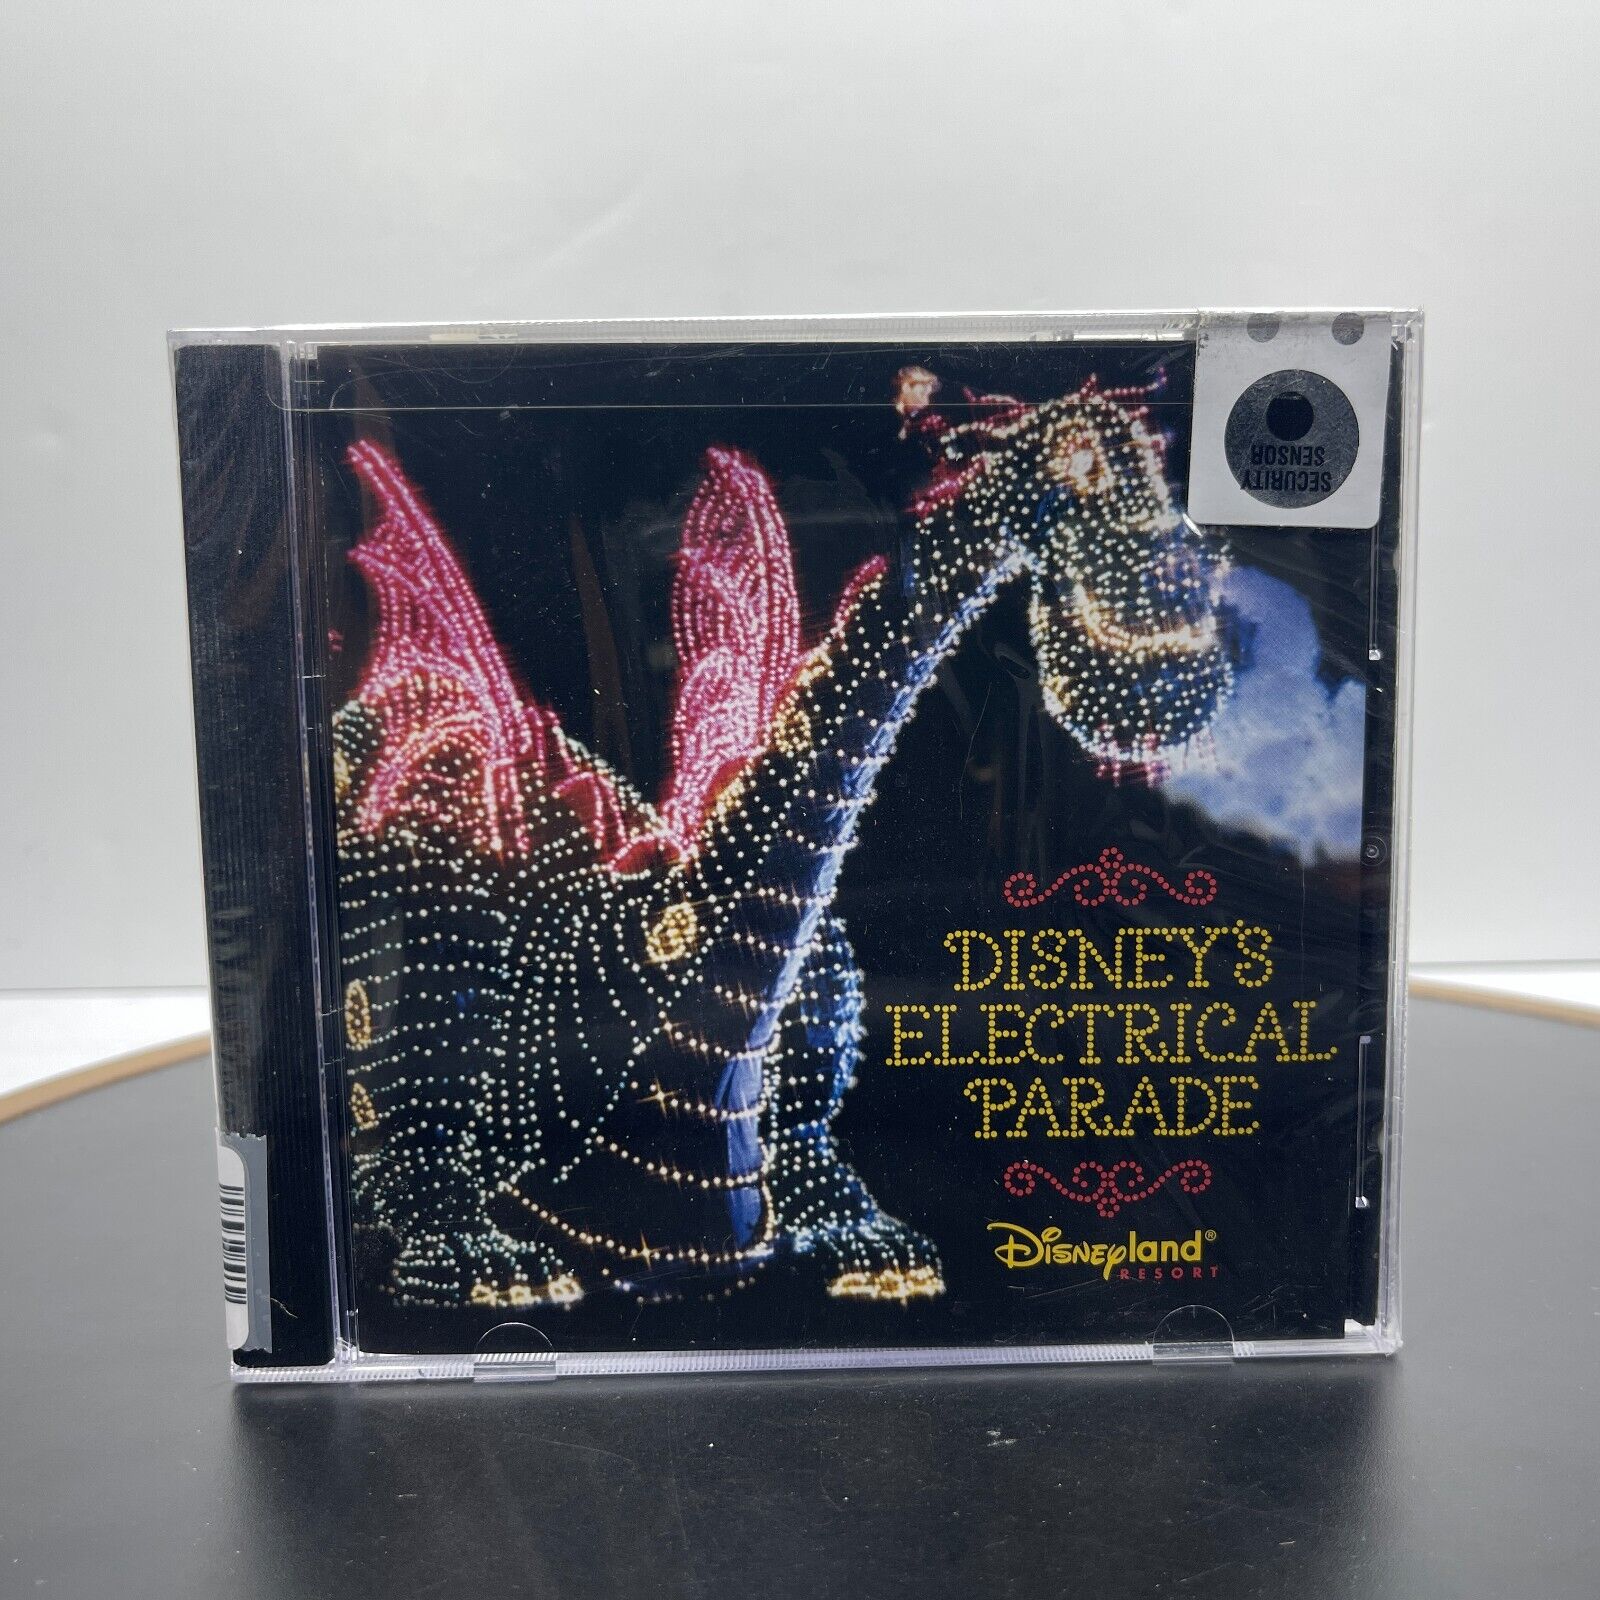 Disney's Electrical Parade by Various Artists (CD, Aug-2001, Buena Vista) NEW 